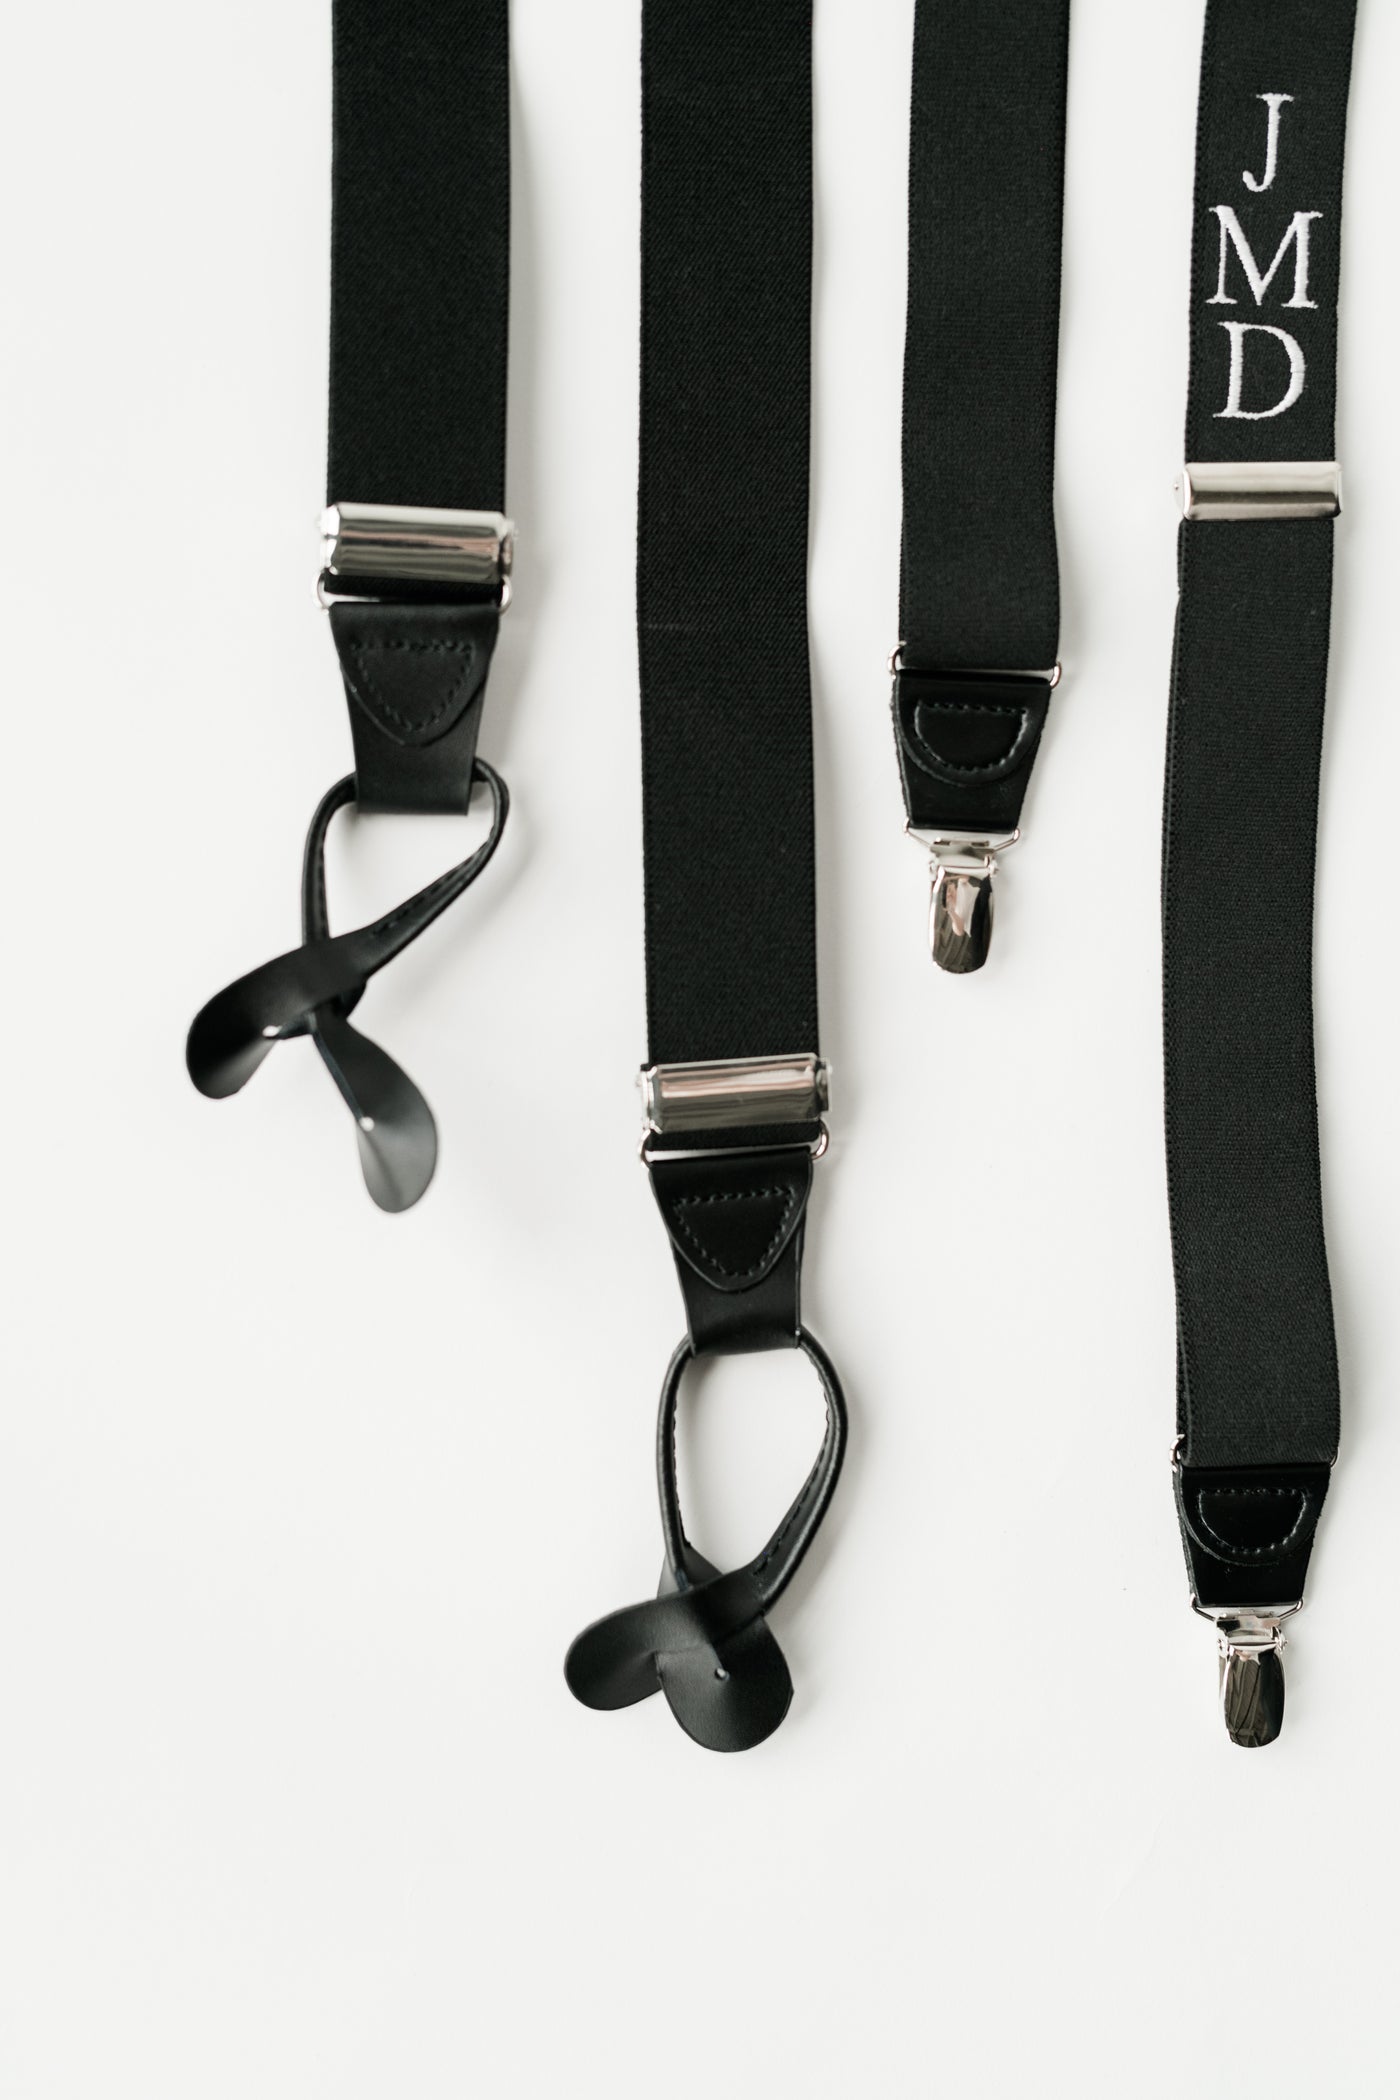 the difference between clip on and button on suspenders